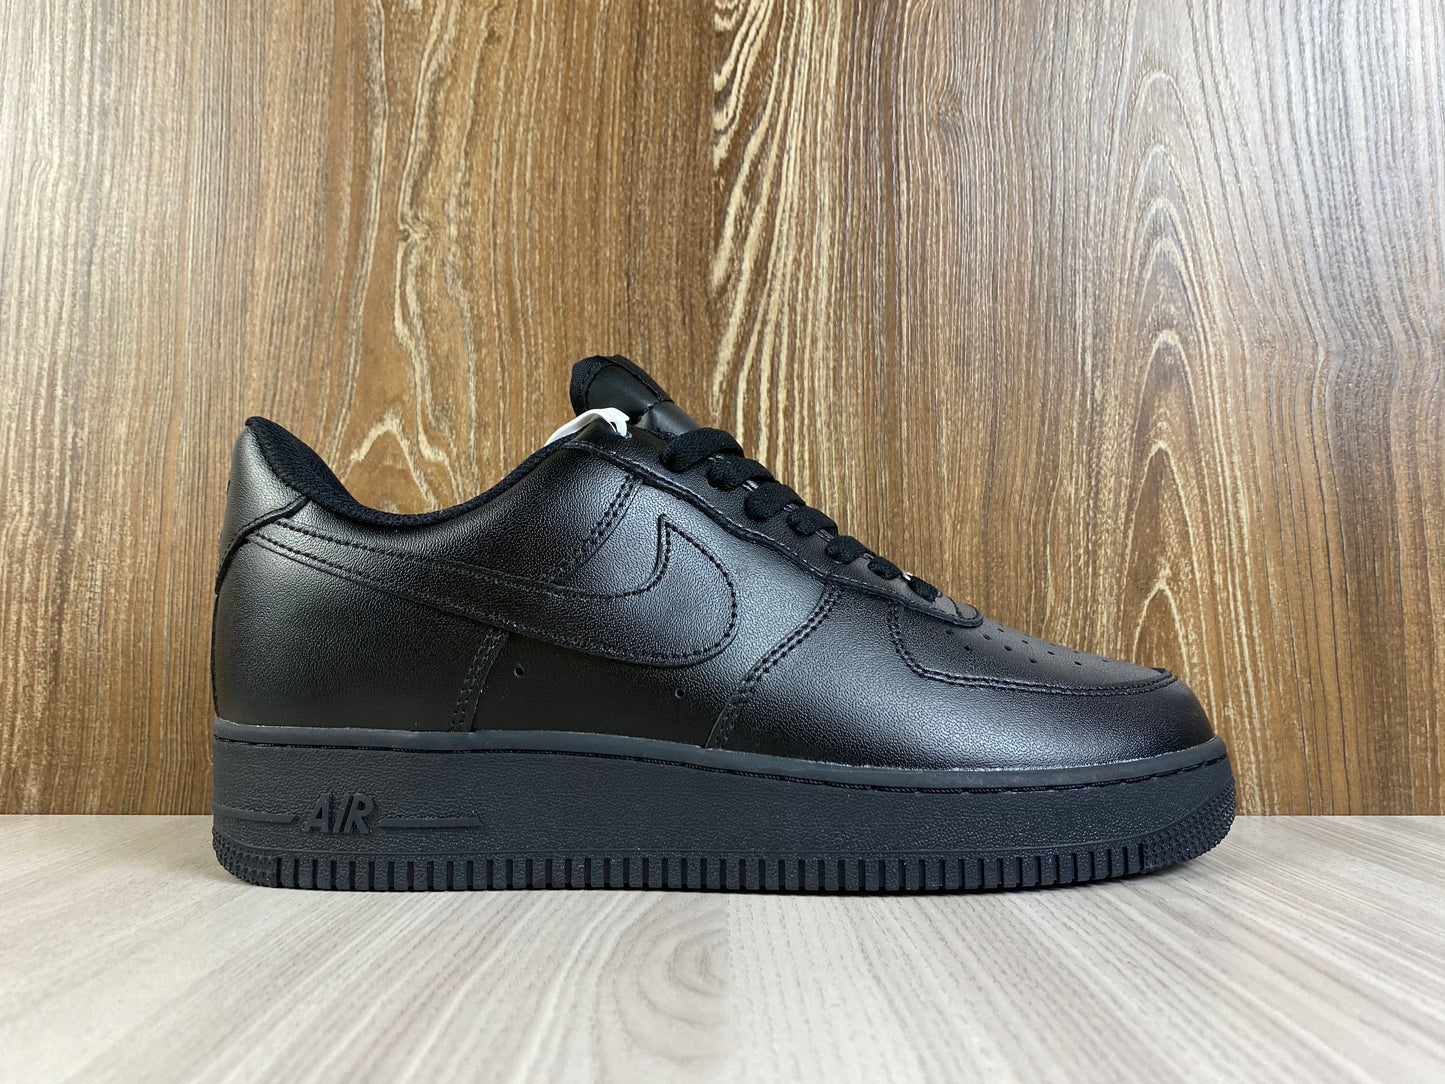 AirForce 1